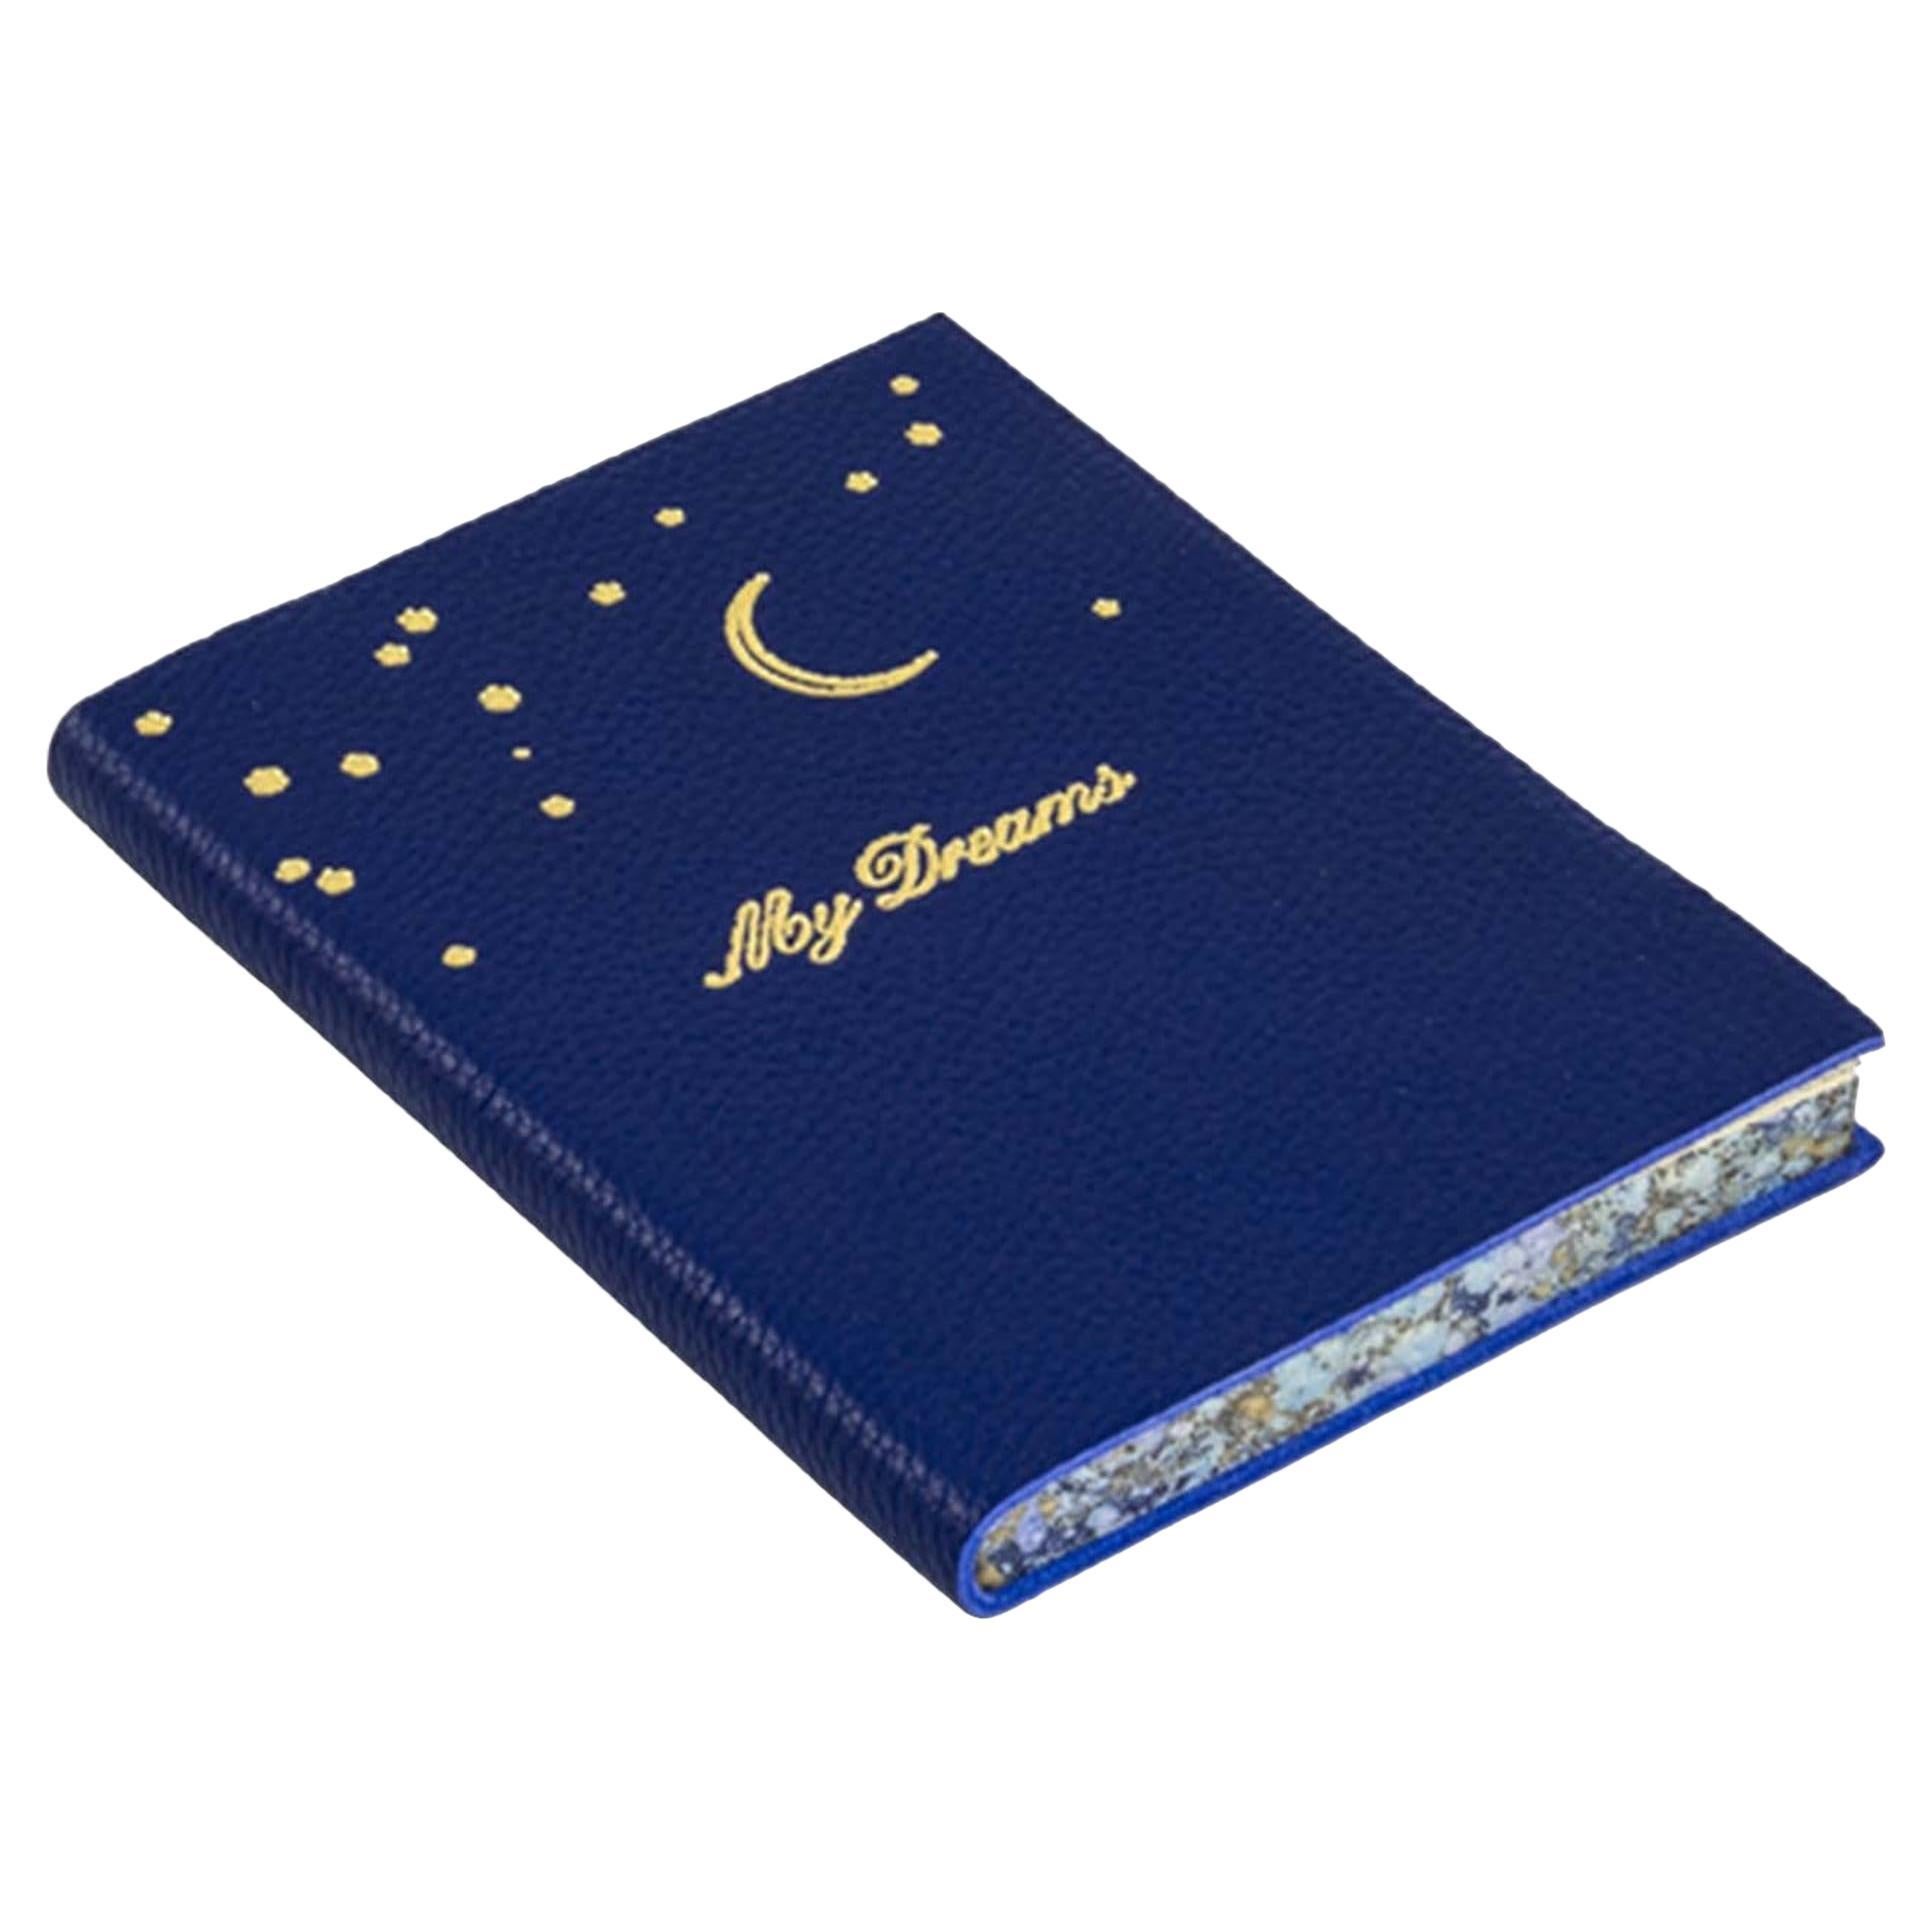 My Dreams Set of 2 Blue Journals